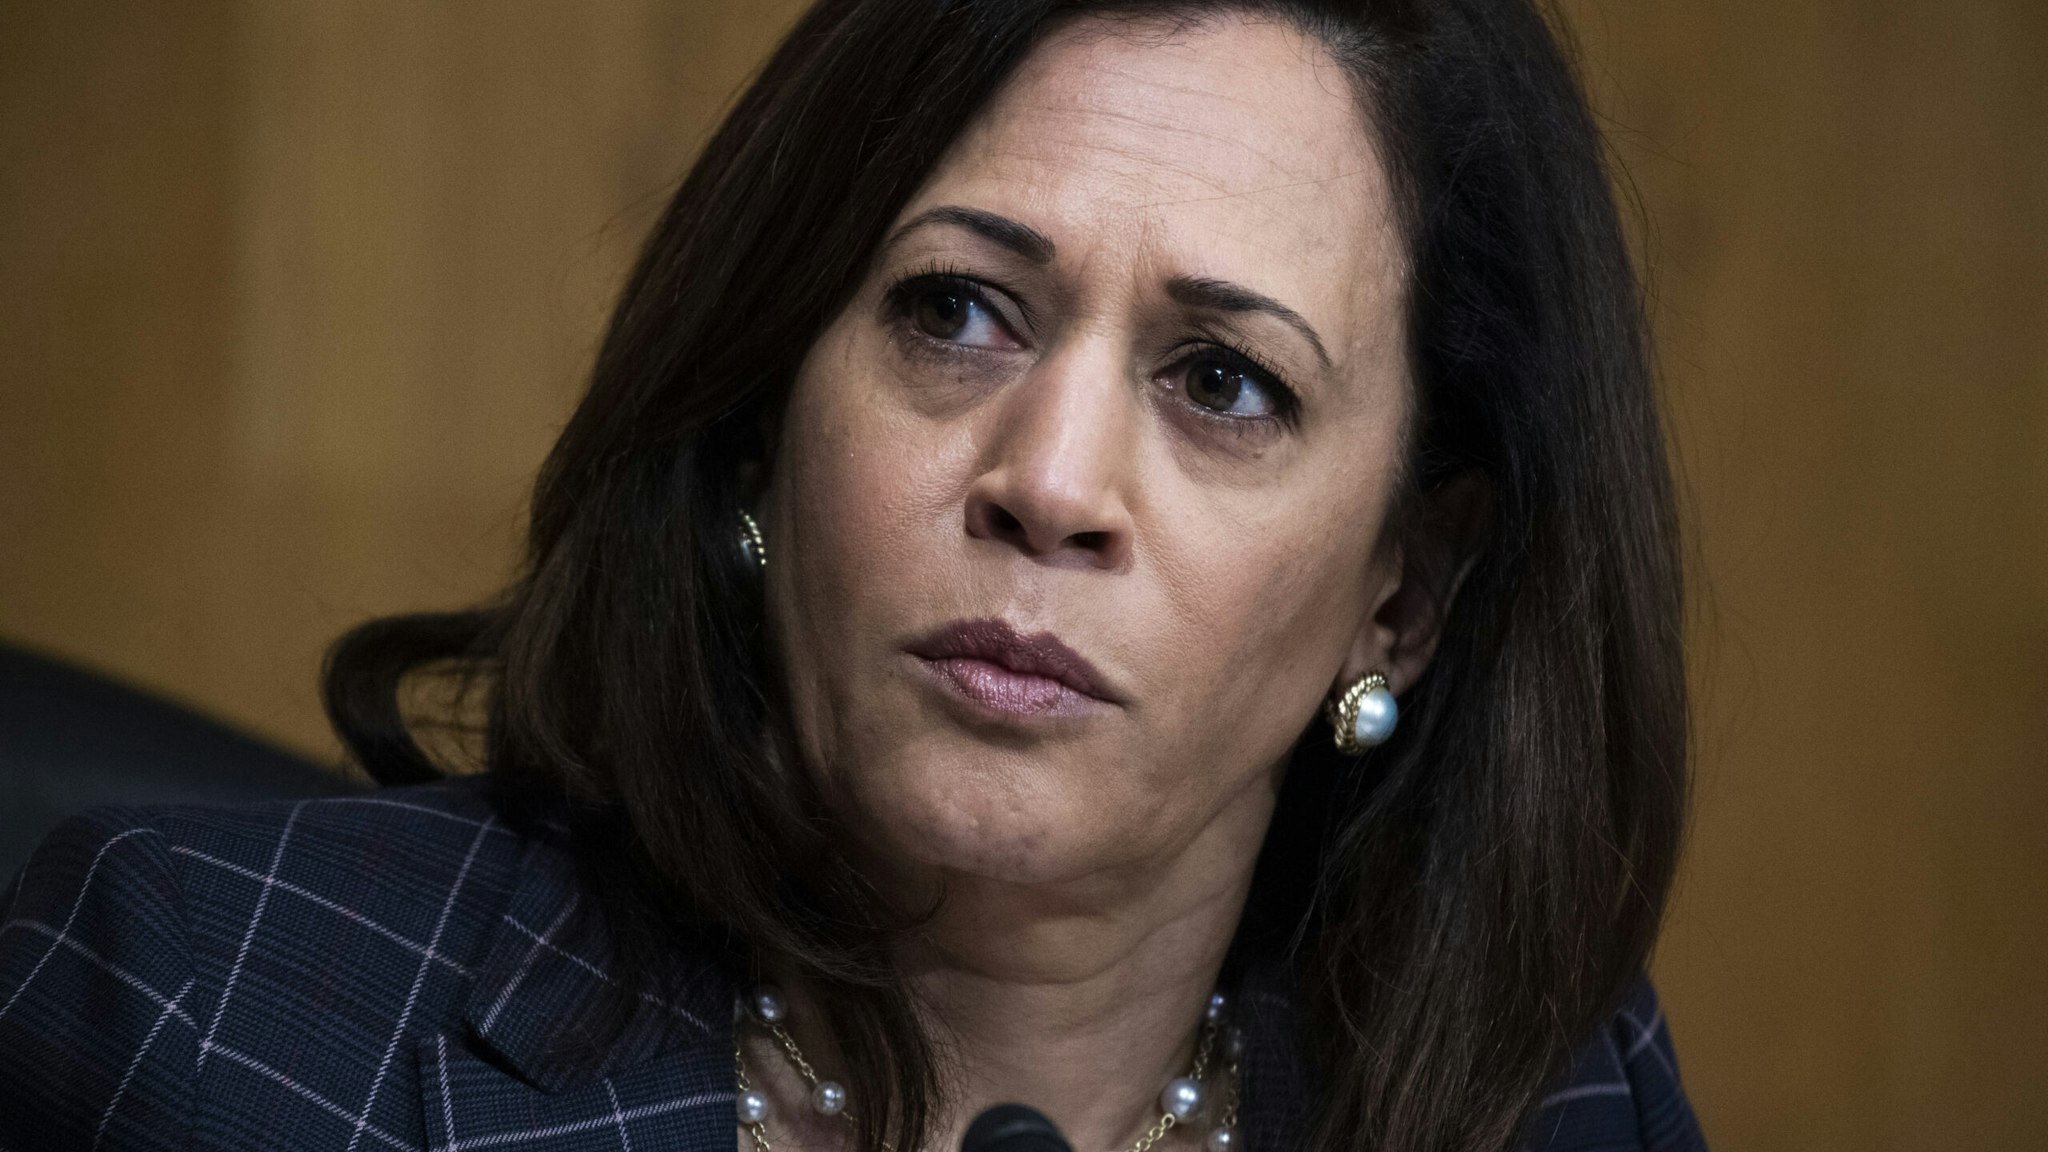 Senator Kamala Harris, a Democrat from California, listens during a Senate Homeland Security and Governmental Affairs Committee hearing in Washington, D.C., U.S., on Thursday, June 25, 2020. Acting commissioner of U.S. Customs and Border Protection, Mark Morgan, said this week said at a roundtable event with President Donald Trump that he's "100% convinced" that 450 miles of the border wall with Mexico will be completed by the end of the year. Photographer: Tom Williams/CQ Roll Call/Bloomberg via Getty Images